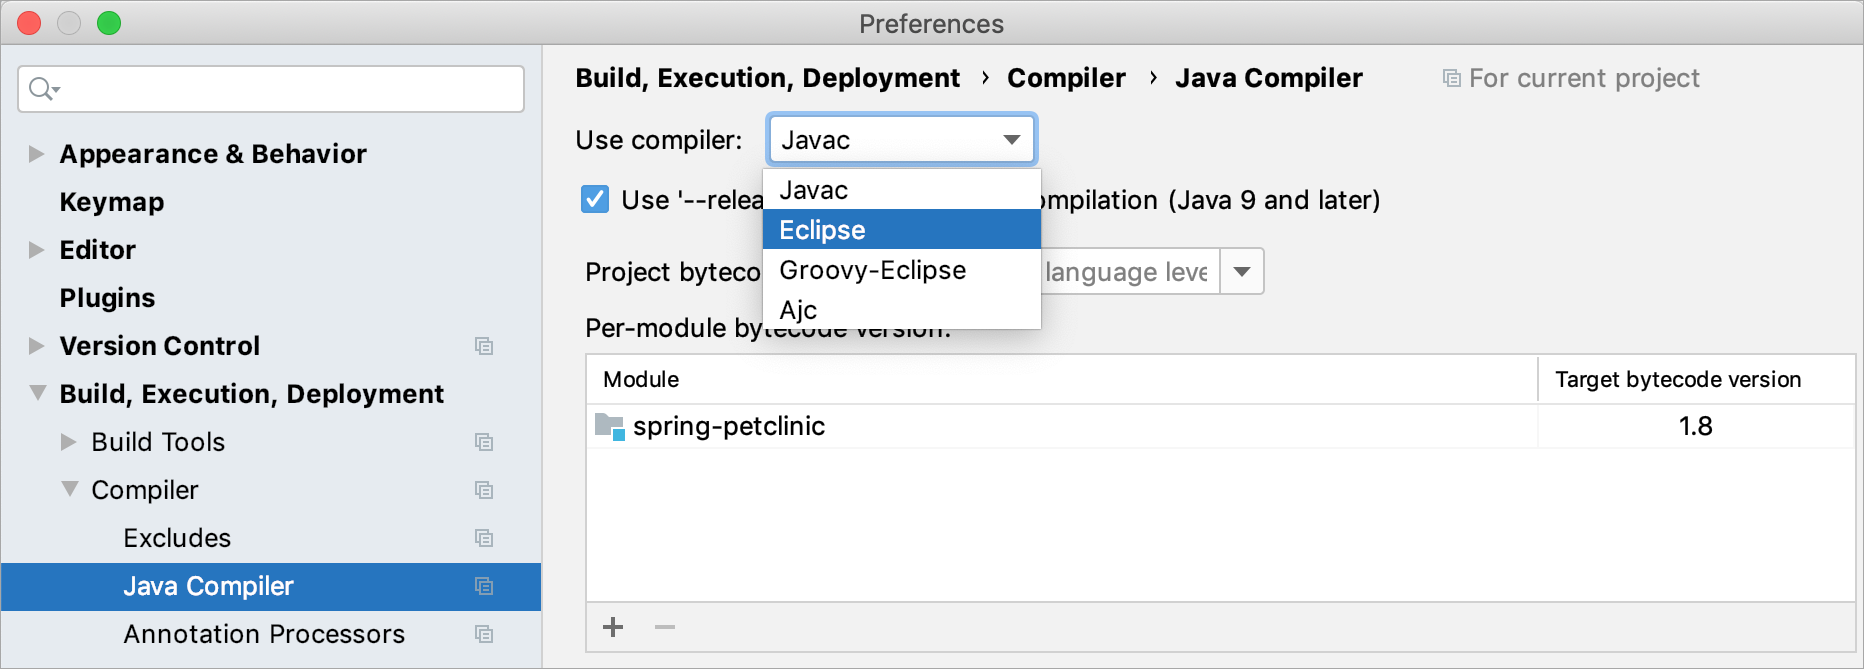 Configuring the Eclipse compiler